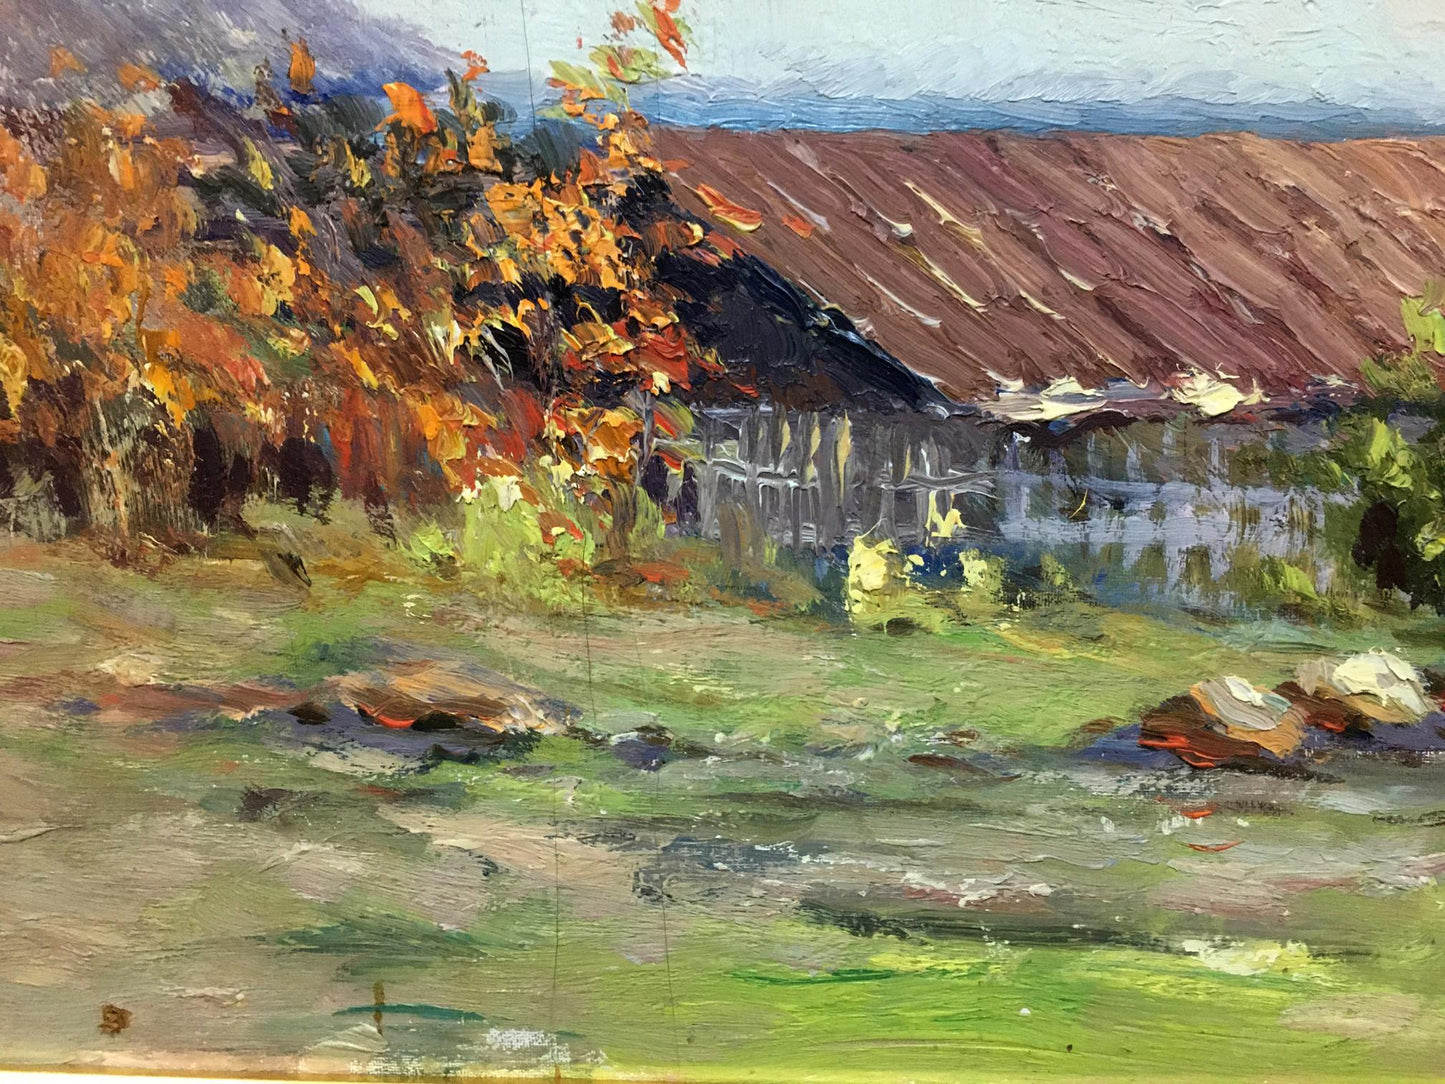 Oil painting Bronstein Mark Emmanuilovich House on the hill